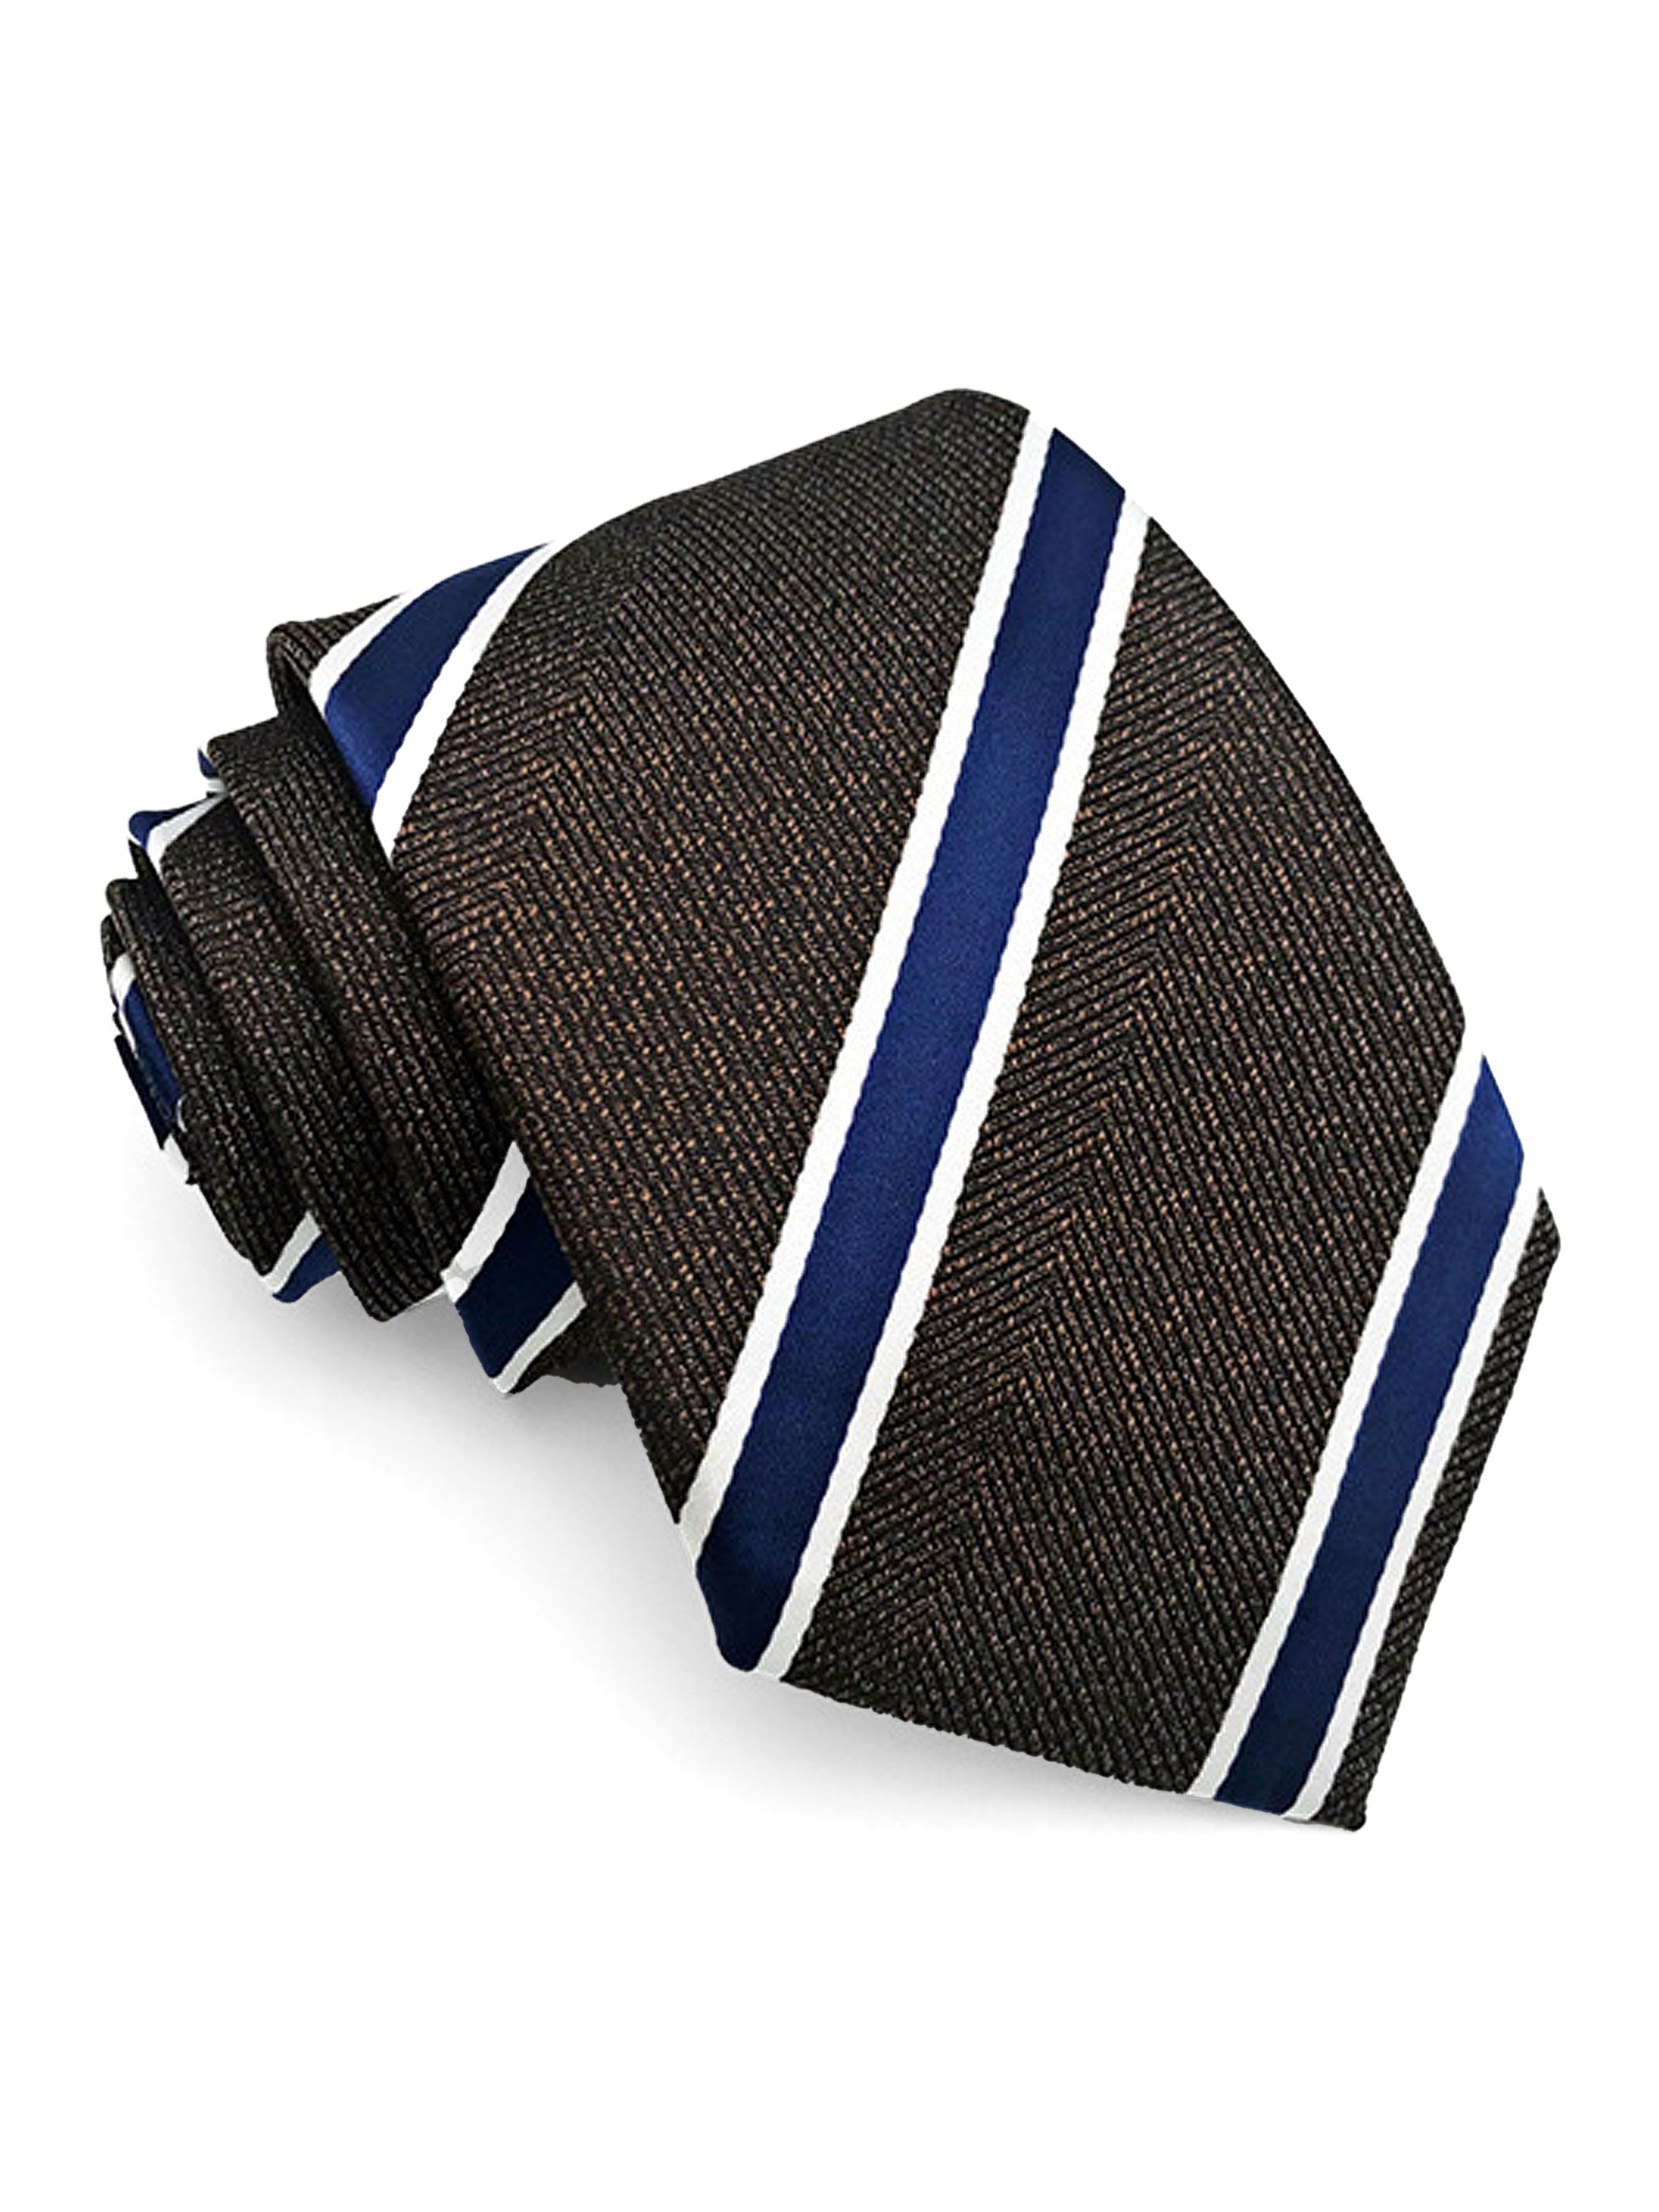 Stripes Tie - Dark Brown With Blue Line - Zeve Shoes